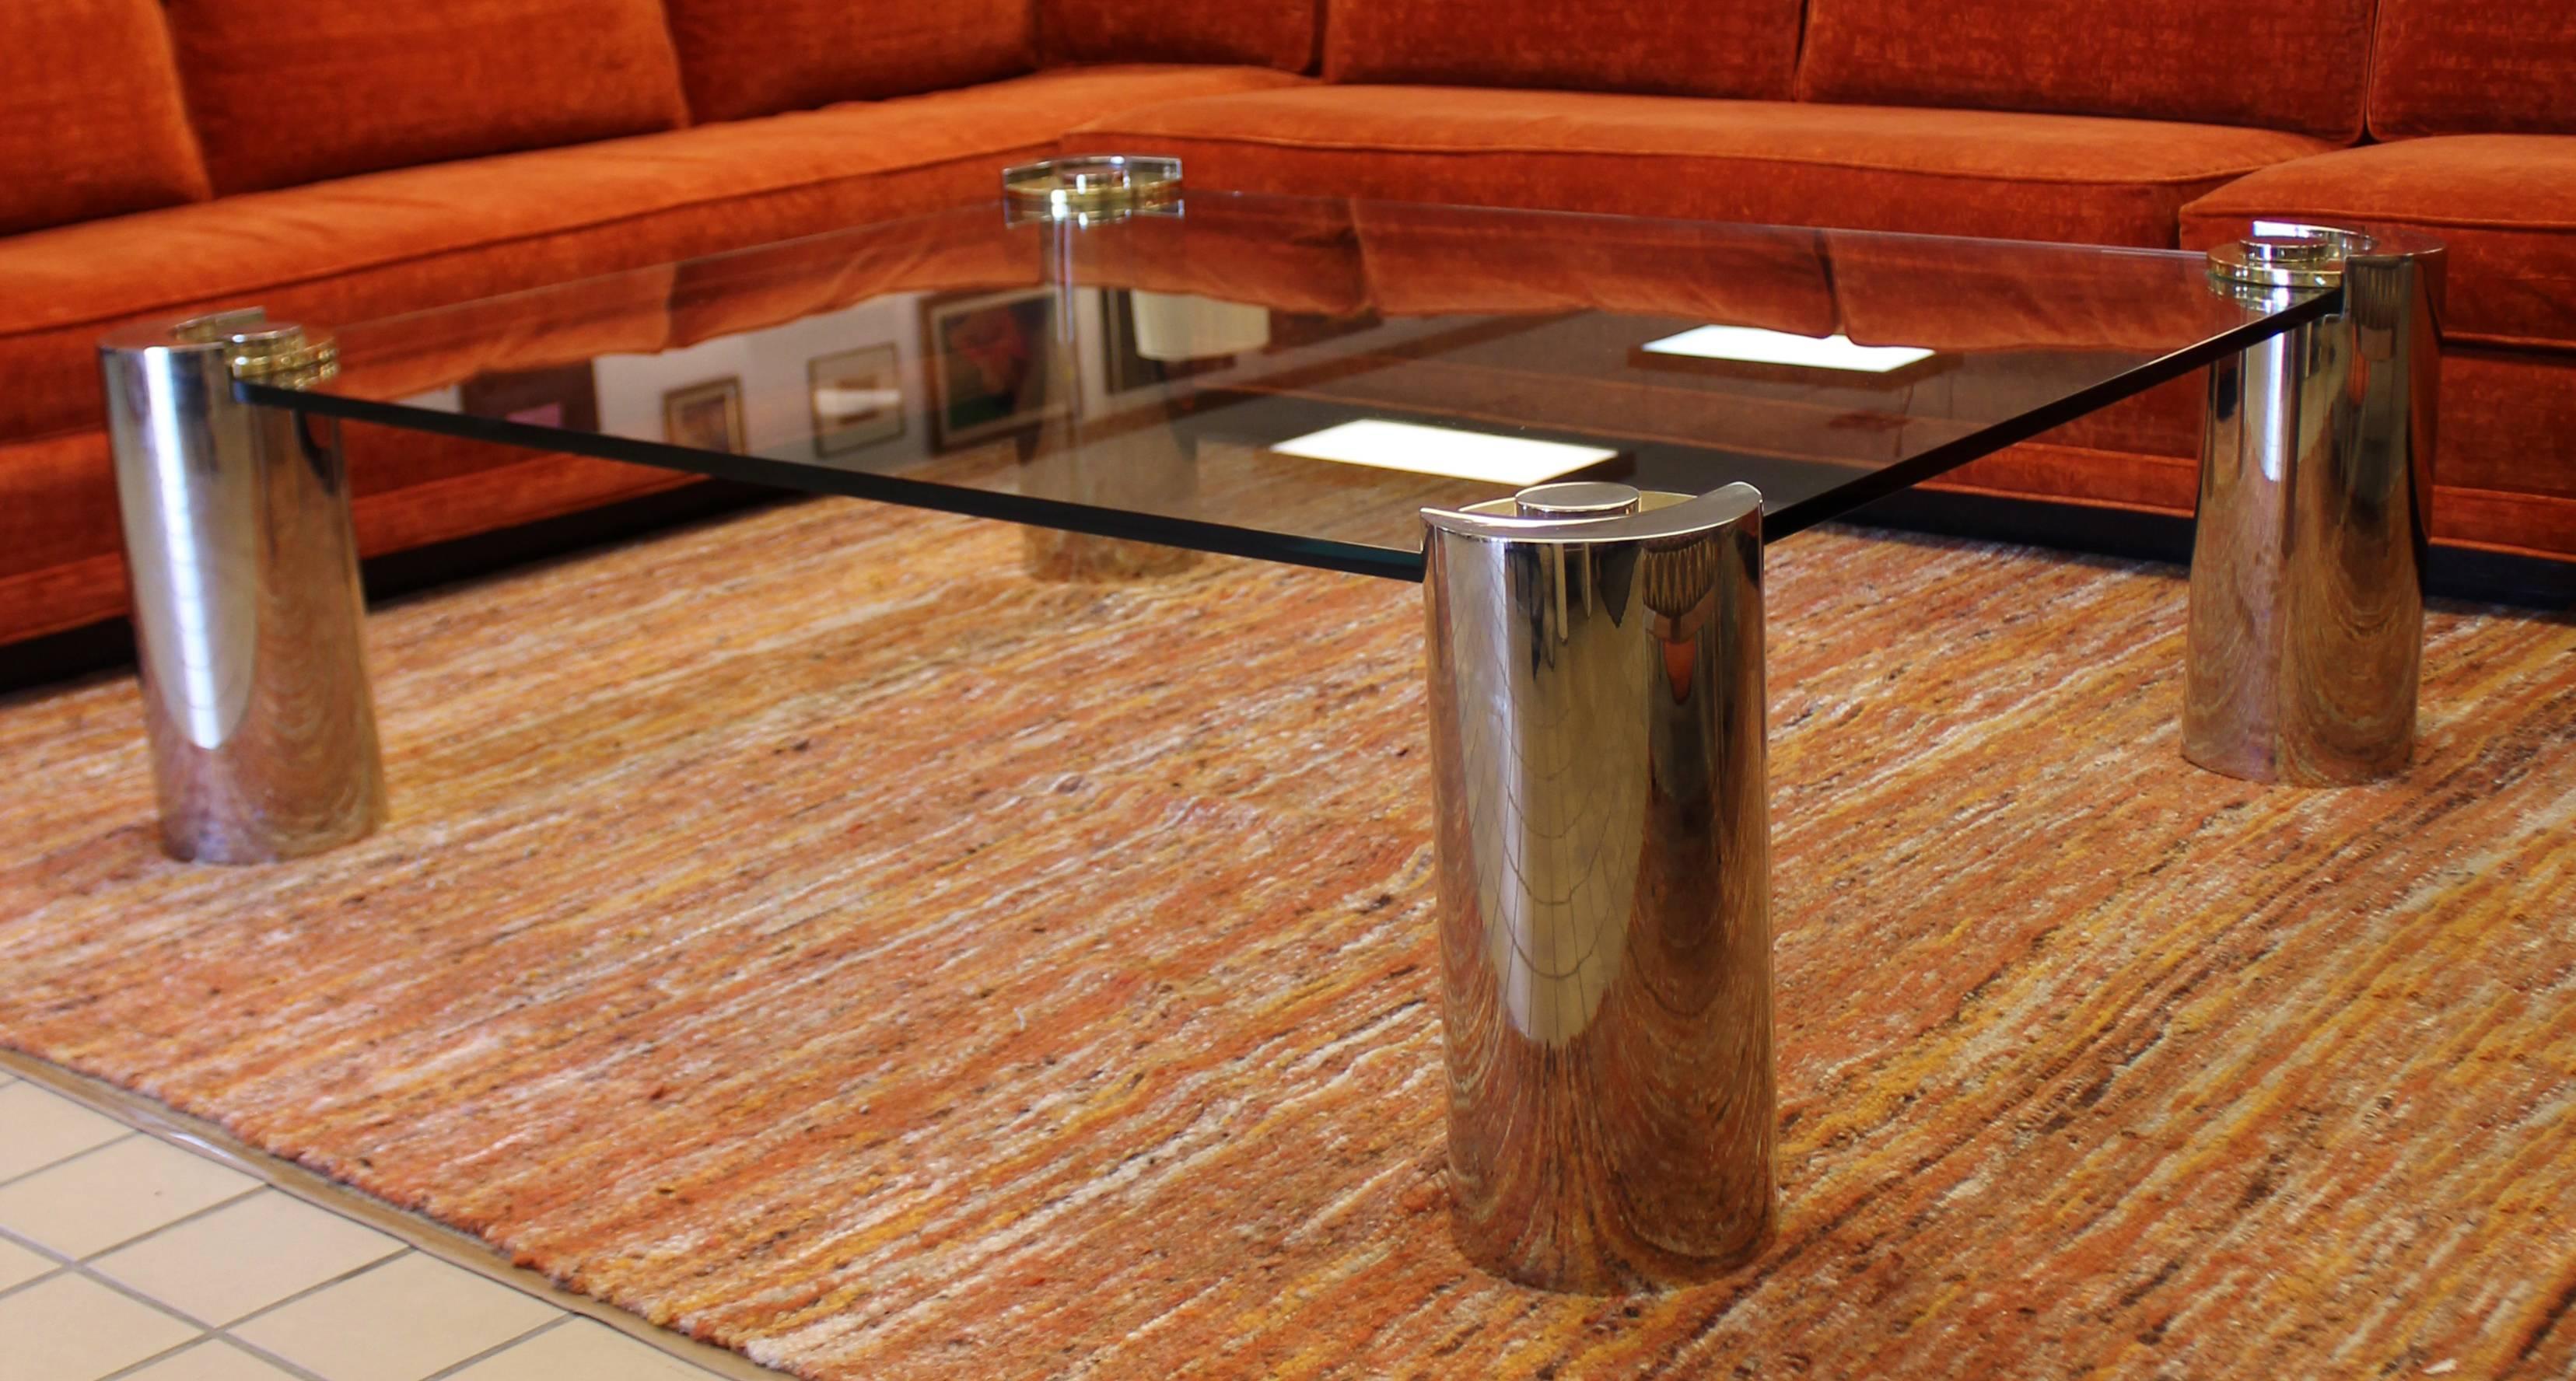 For your consideration is an incredible coffee table, with a glass top inset into four brass and chrome, cylindrical legs, designed and signed by Karl Springer, circa the 1970s. In excellent condition. The dimensions are 52